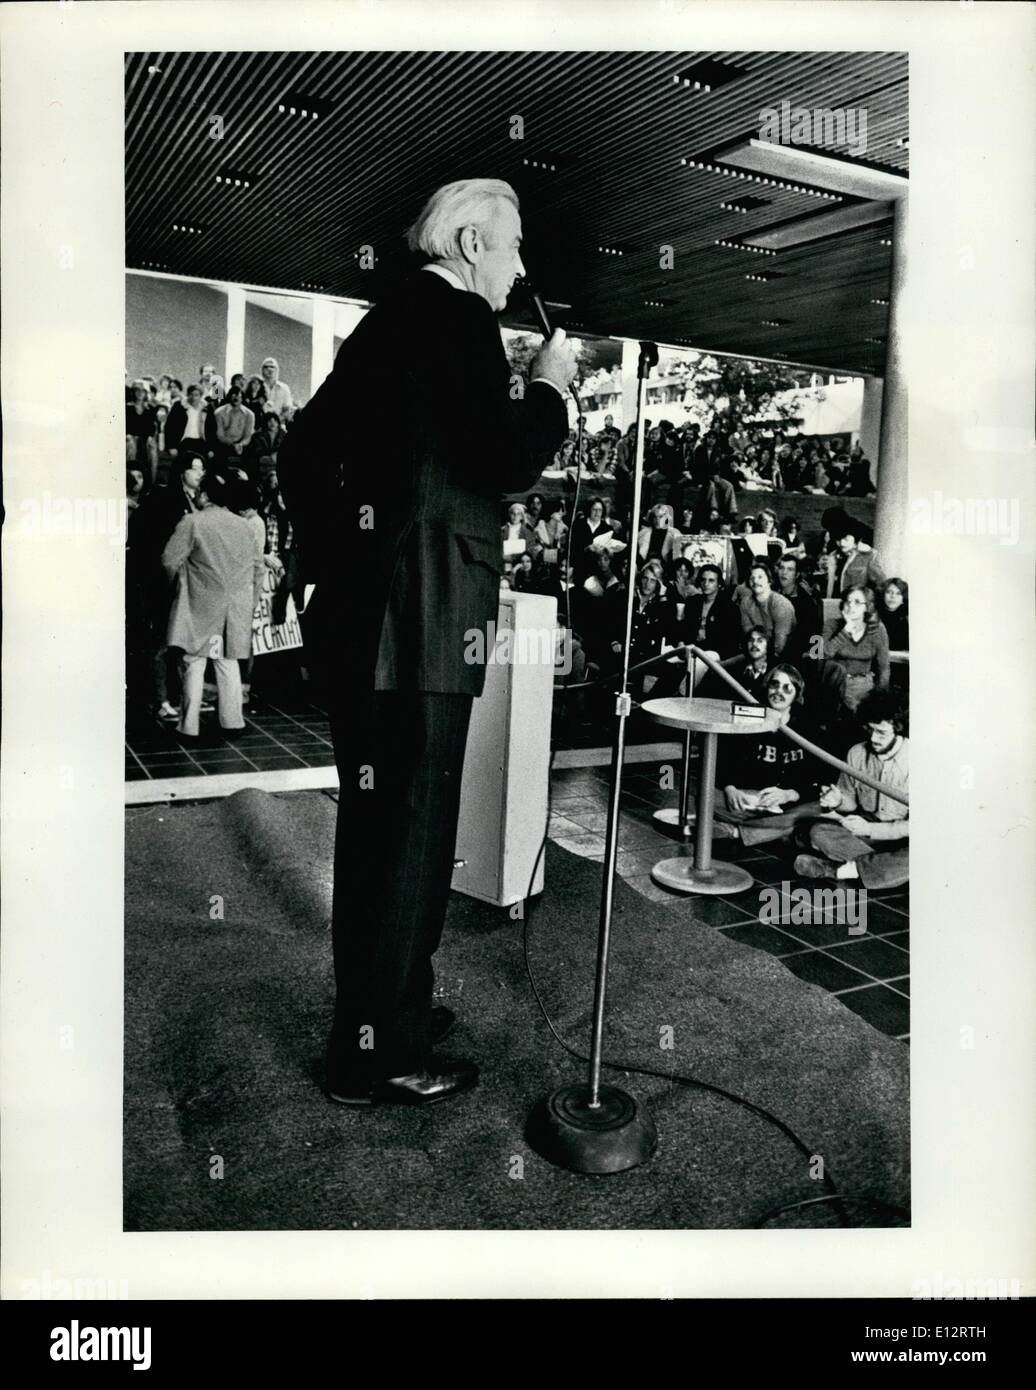 Feb. 25, 2012 - Thursday, Oct. 28th, 1976 Trenton Commons, Center City, Trenton. Presidential candidate for the Independent Party, Eugene McCarthy, speaking to an enthusiastic audience of students at the Student Center of the Trenton State Campus. Stock Photo